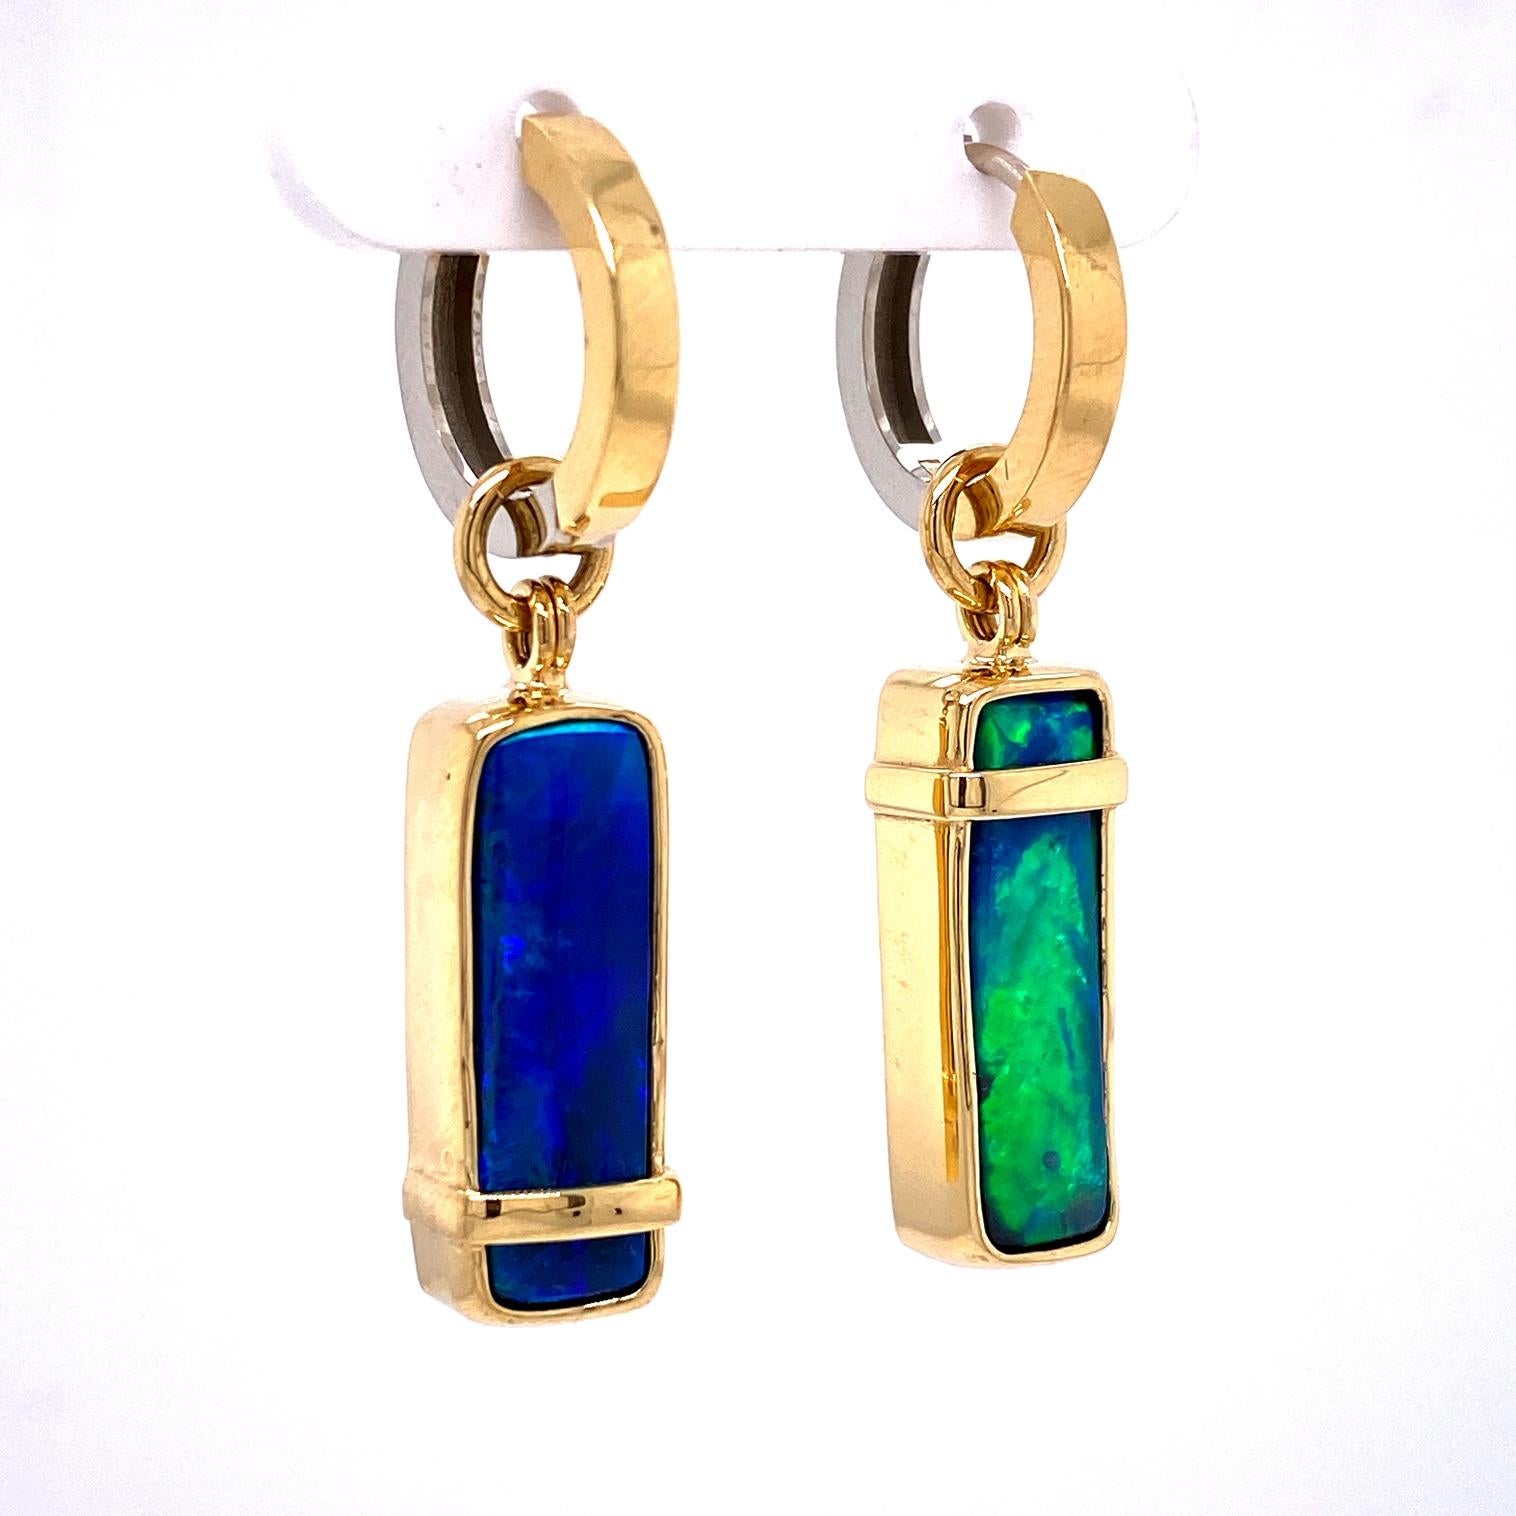 A pair of reversible 18k white and yellow gold reversible huggie hoops, with a pair of 18k yellow gold earring jackets featuring two rectangular free form shaped Australian Boulder Opals 9.55 total carat weight. These earrings were designed and made